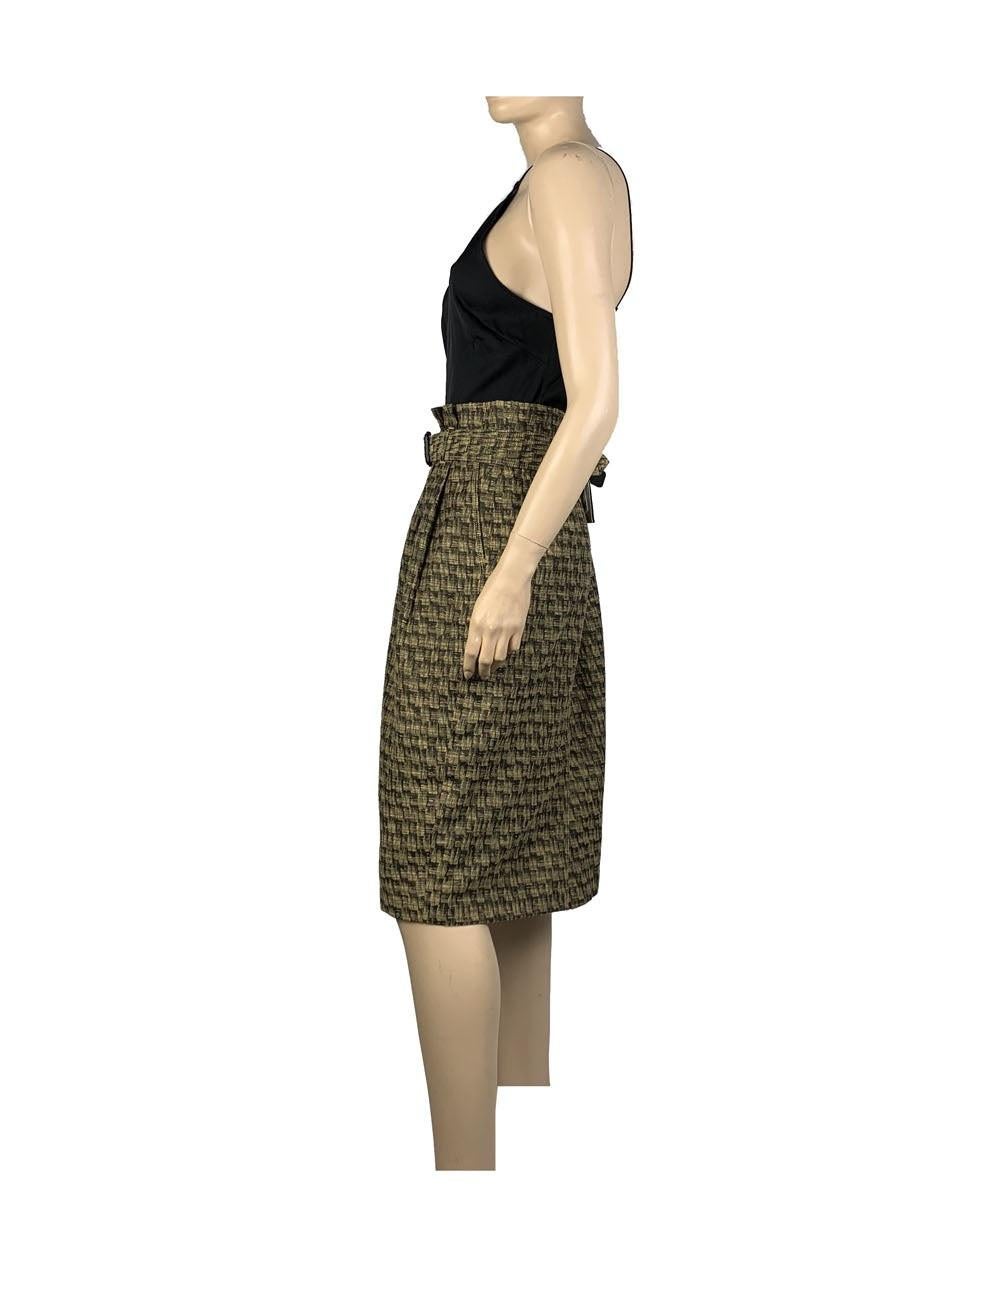 Brown Midi Skirt with Belt.

Additional information:
Material: Cotton
Size: UK 12 / EU 40
Overall Condition: New